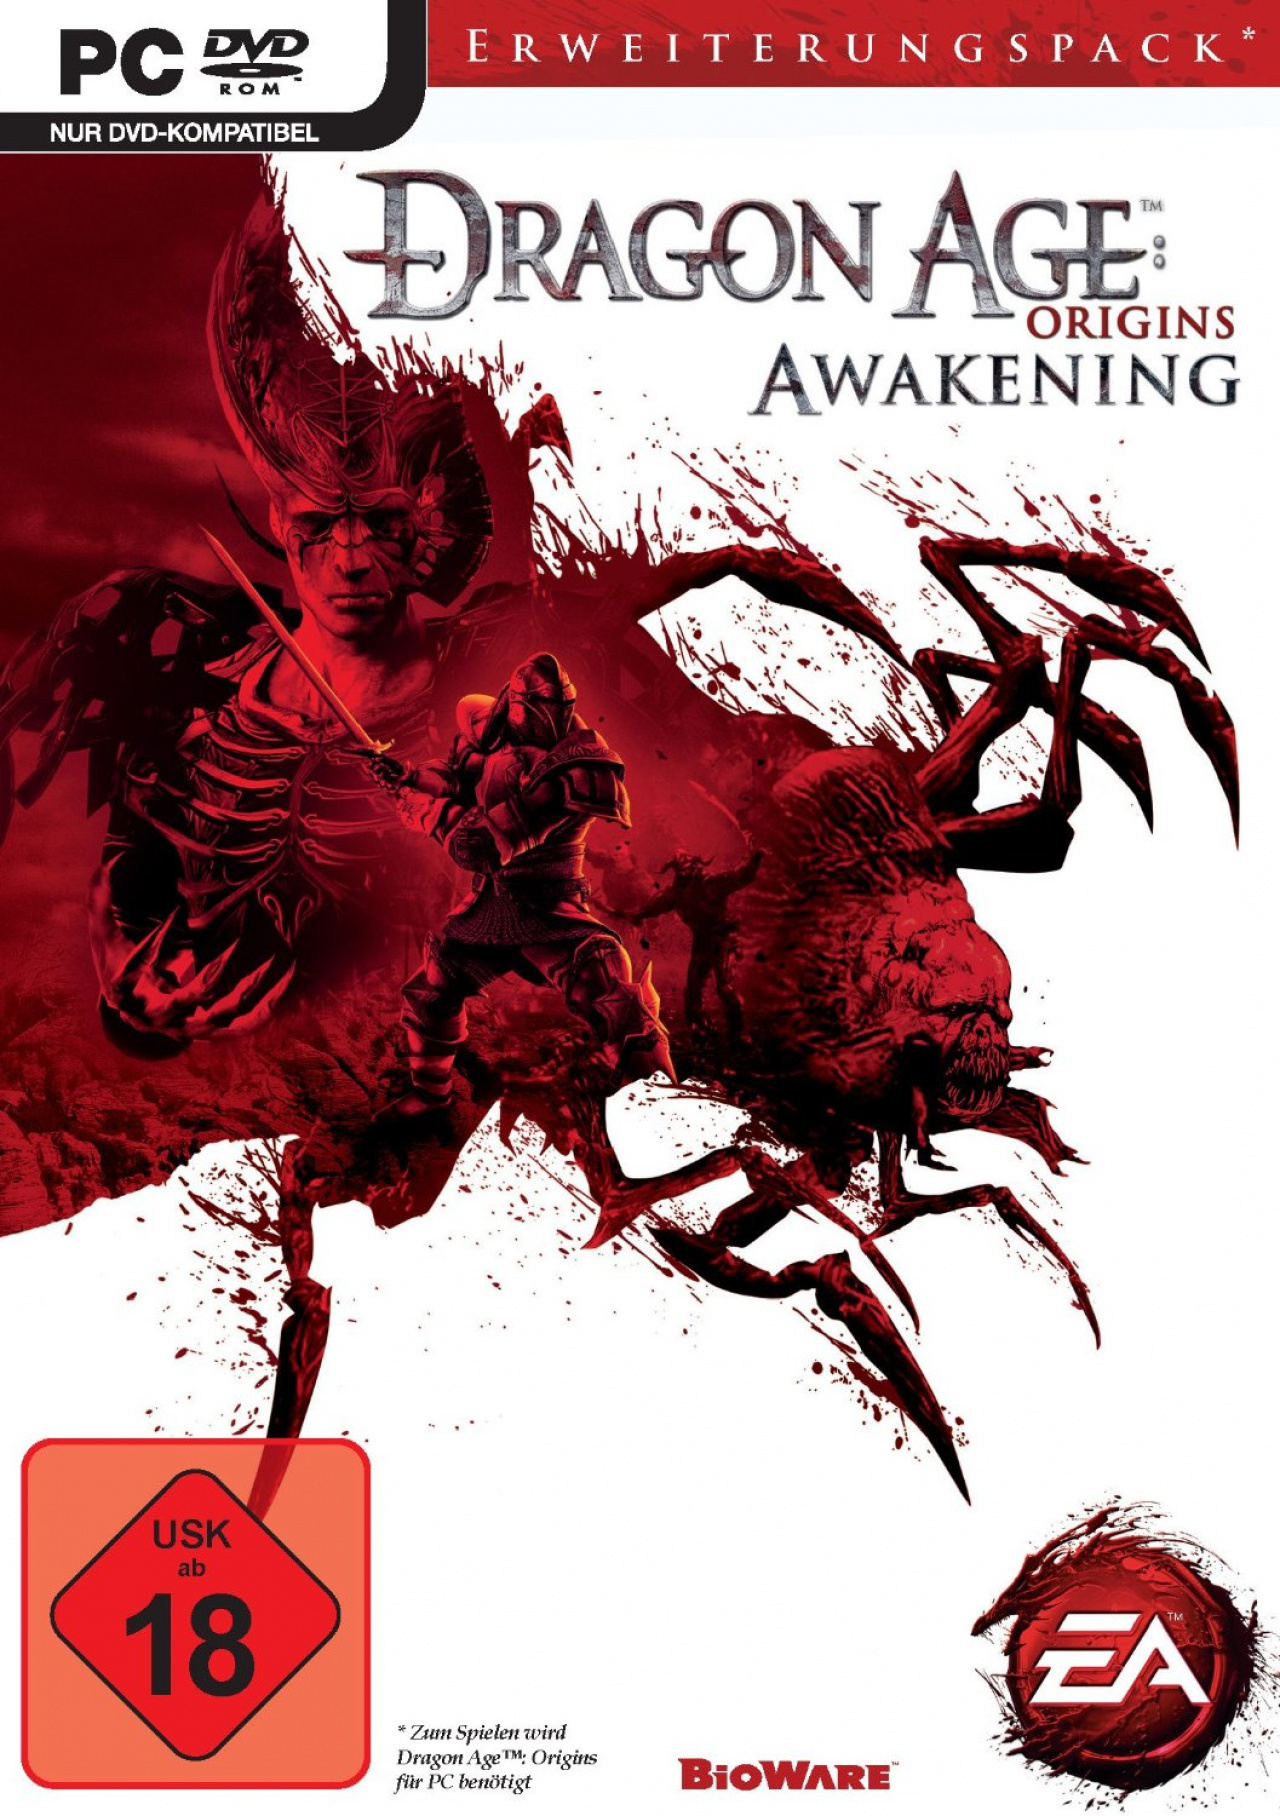 dragon-age-origins-awakening-video-game-reviews-and-previews-pc-ps4-xbox-one-and-mobile